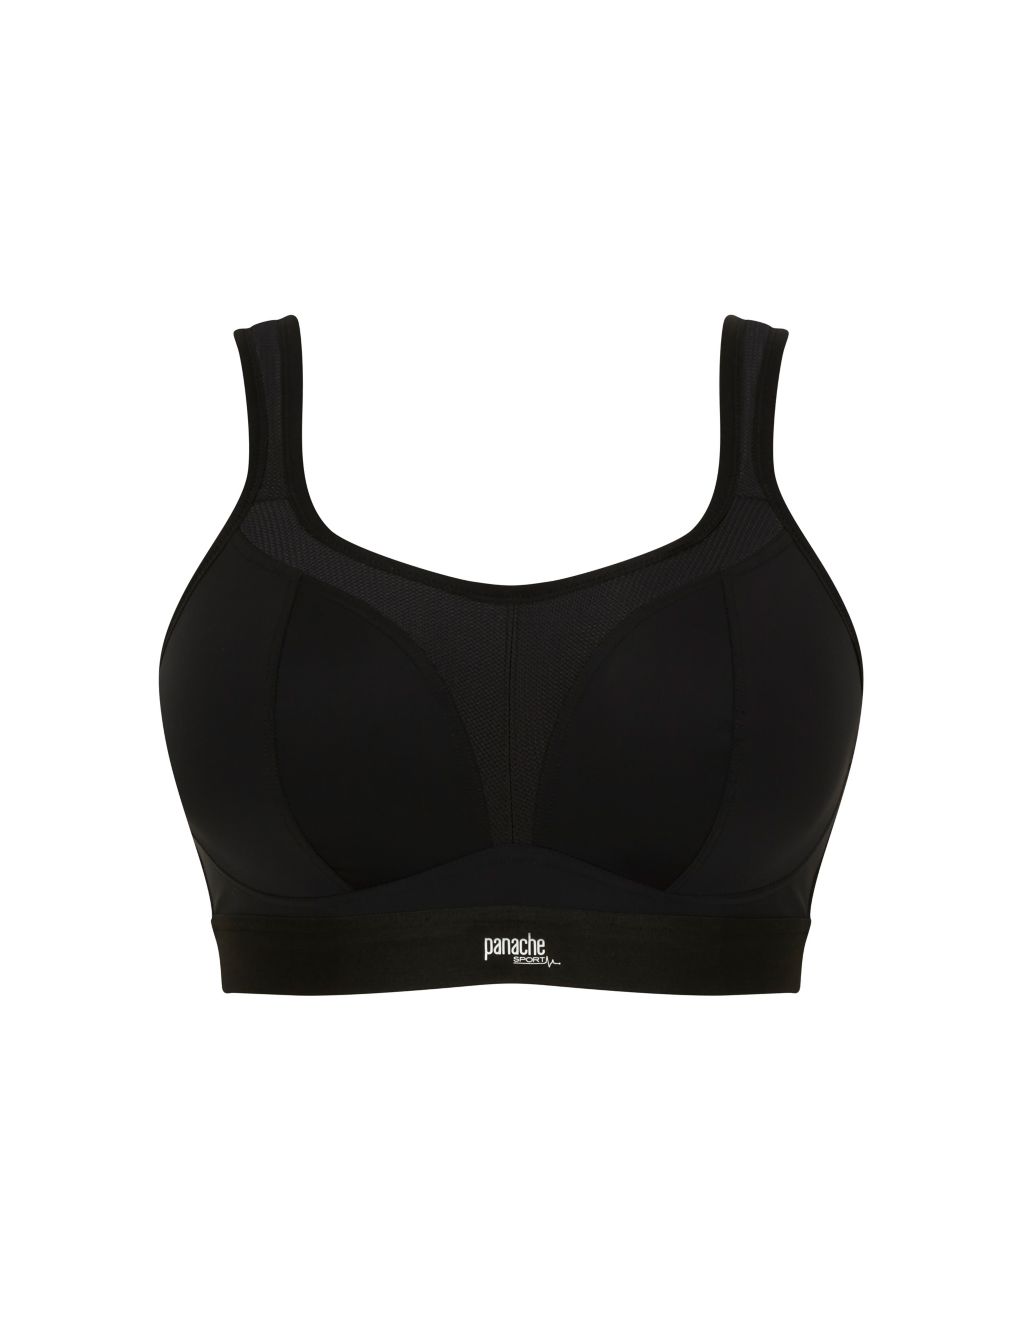 Ultimate Support Non Wired Sports Bra D-J image 2